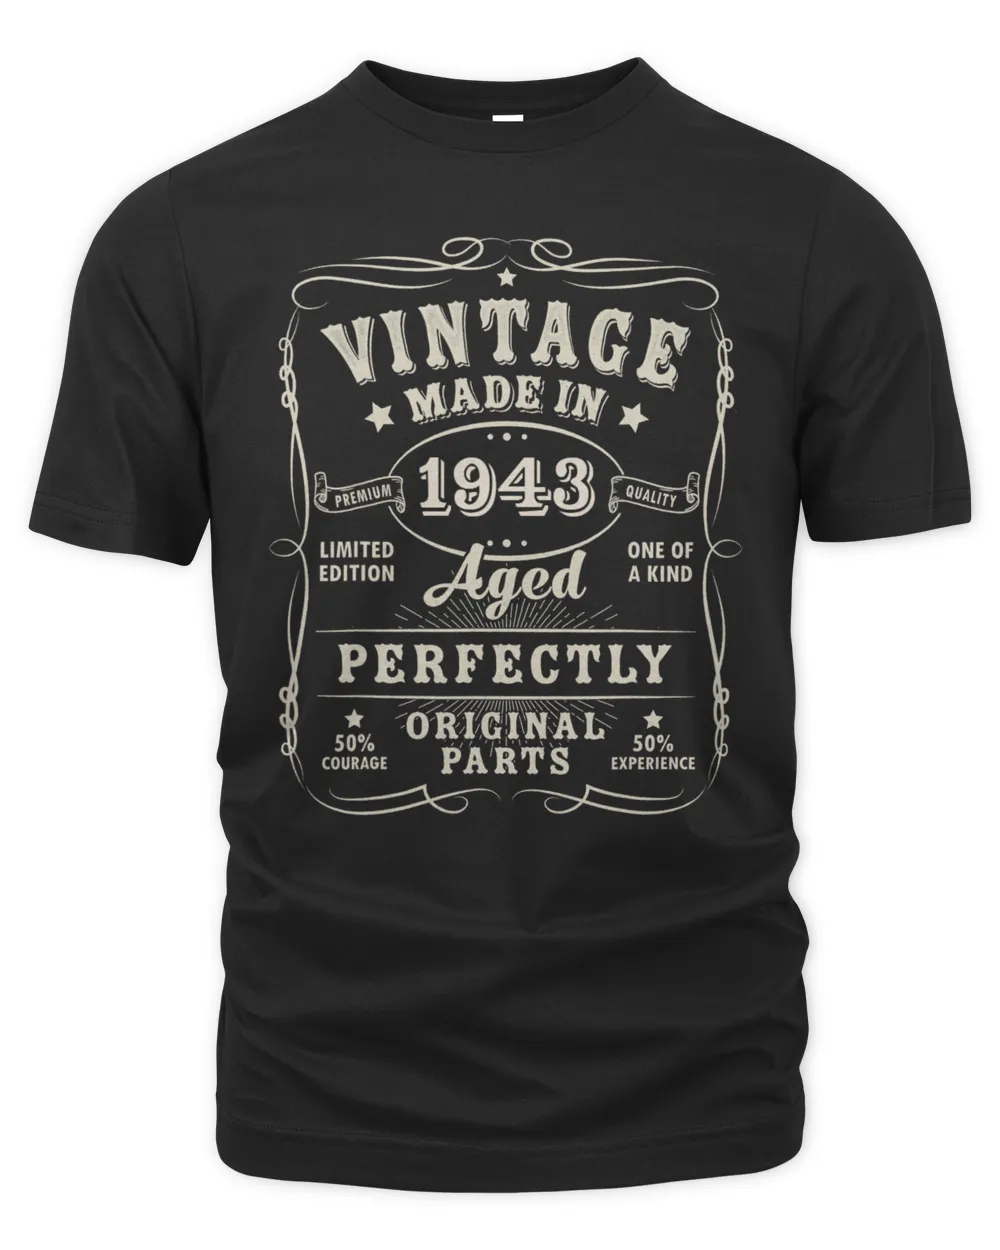 Vintage Made in 19xx